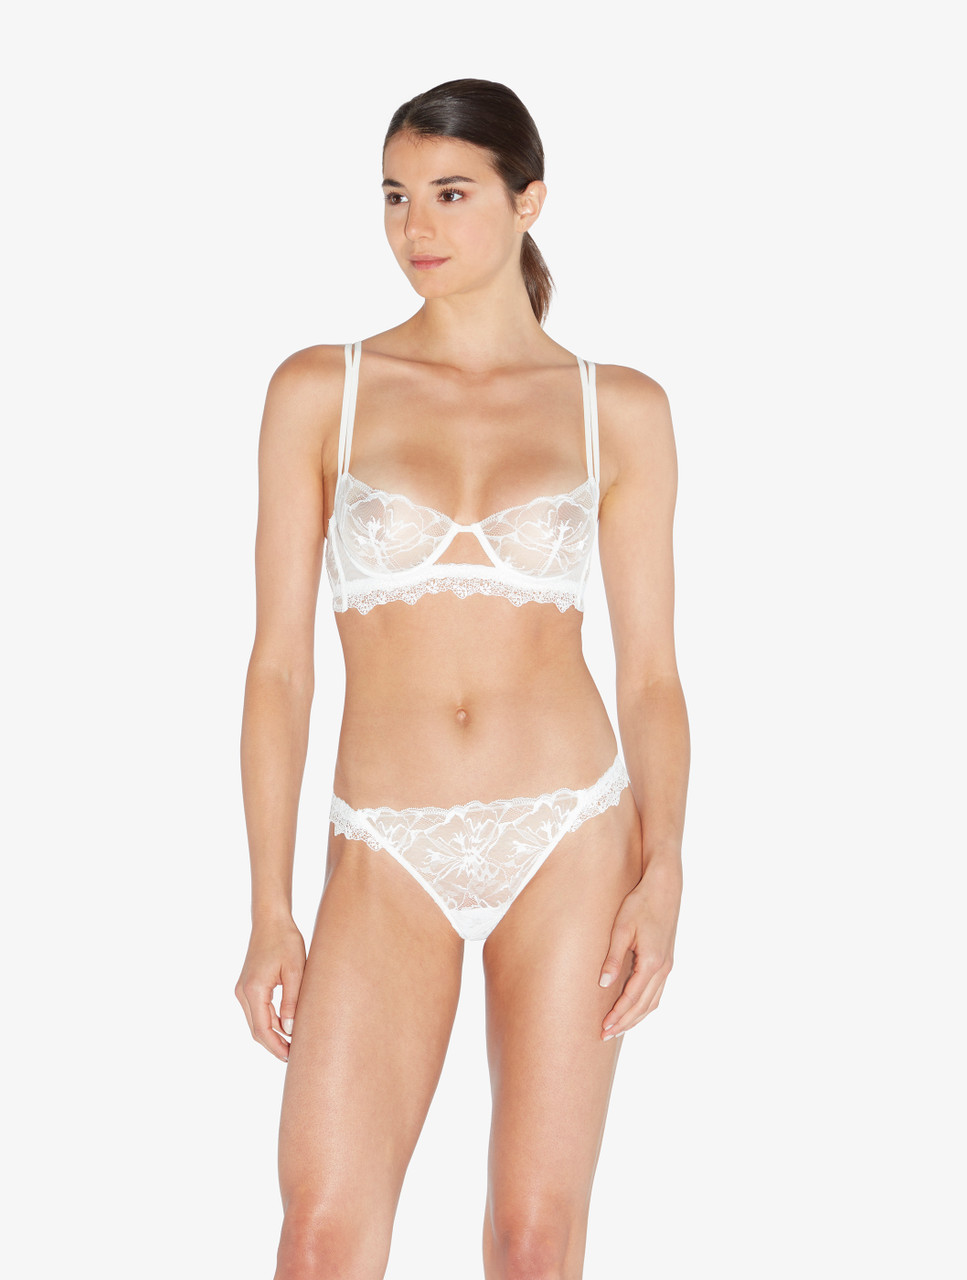 Balconette Bra in Off White with Leavers lace